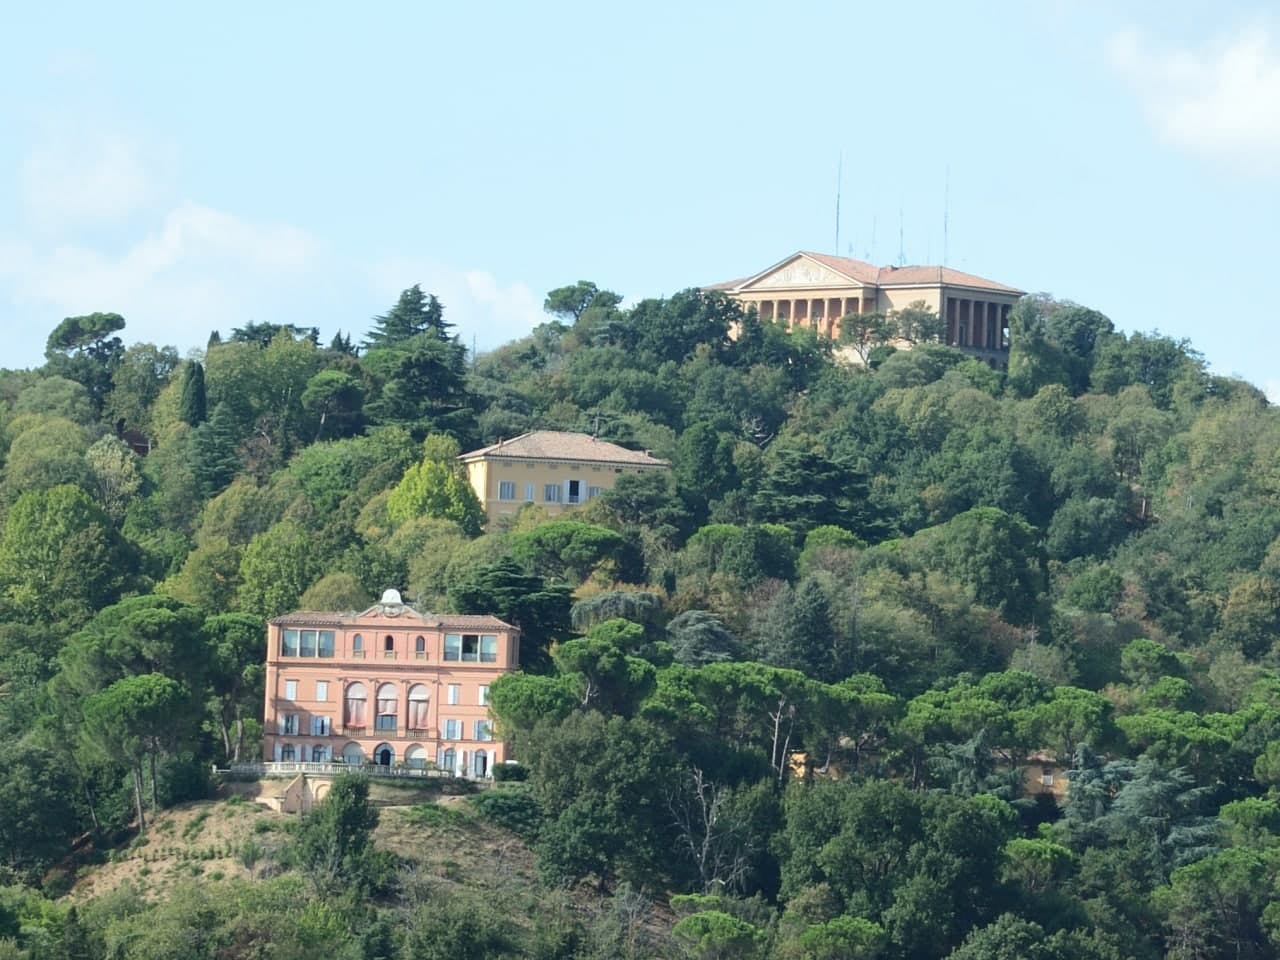 Picture of Villa Baruzziana situated in the bolognese hills.